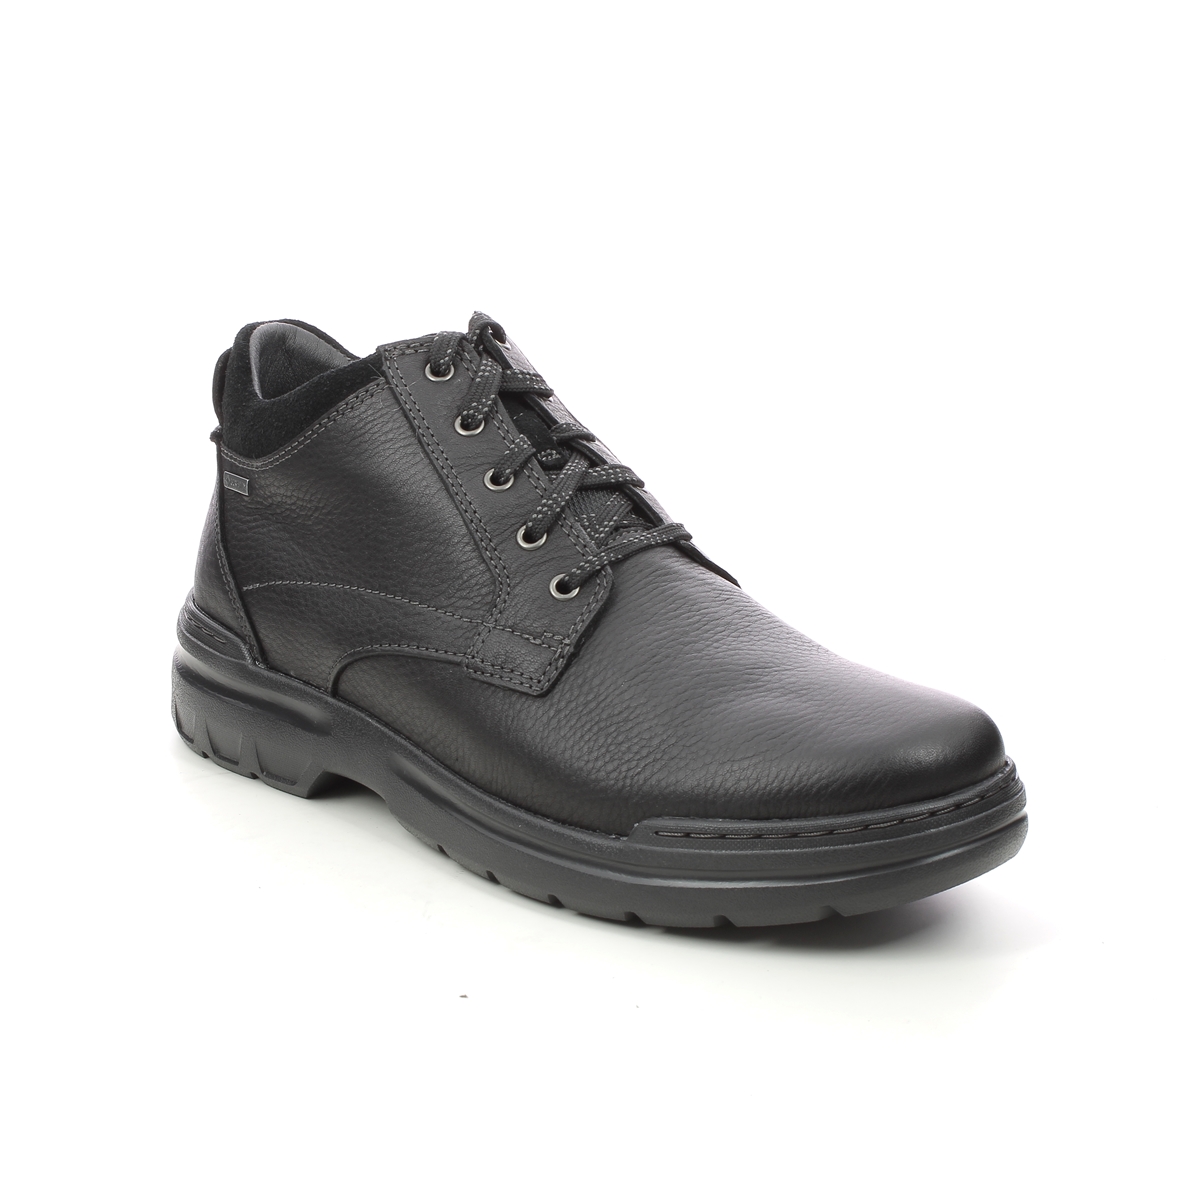 Clarks Rockie 2 Up Gtx Black Leather Mens Boots 612568H In Size 9 In Plain Black Leather H Width Fitting Extra Wide